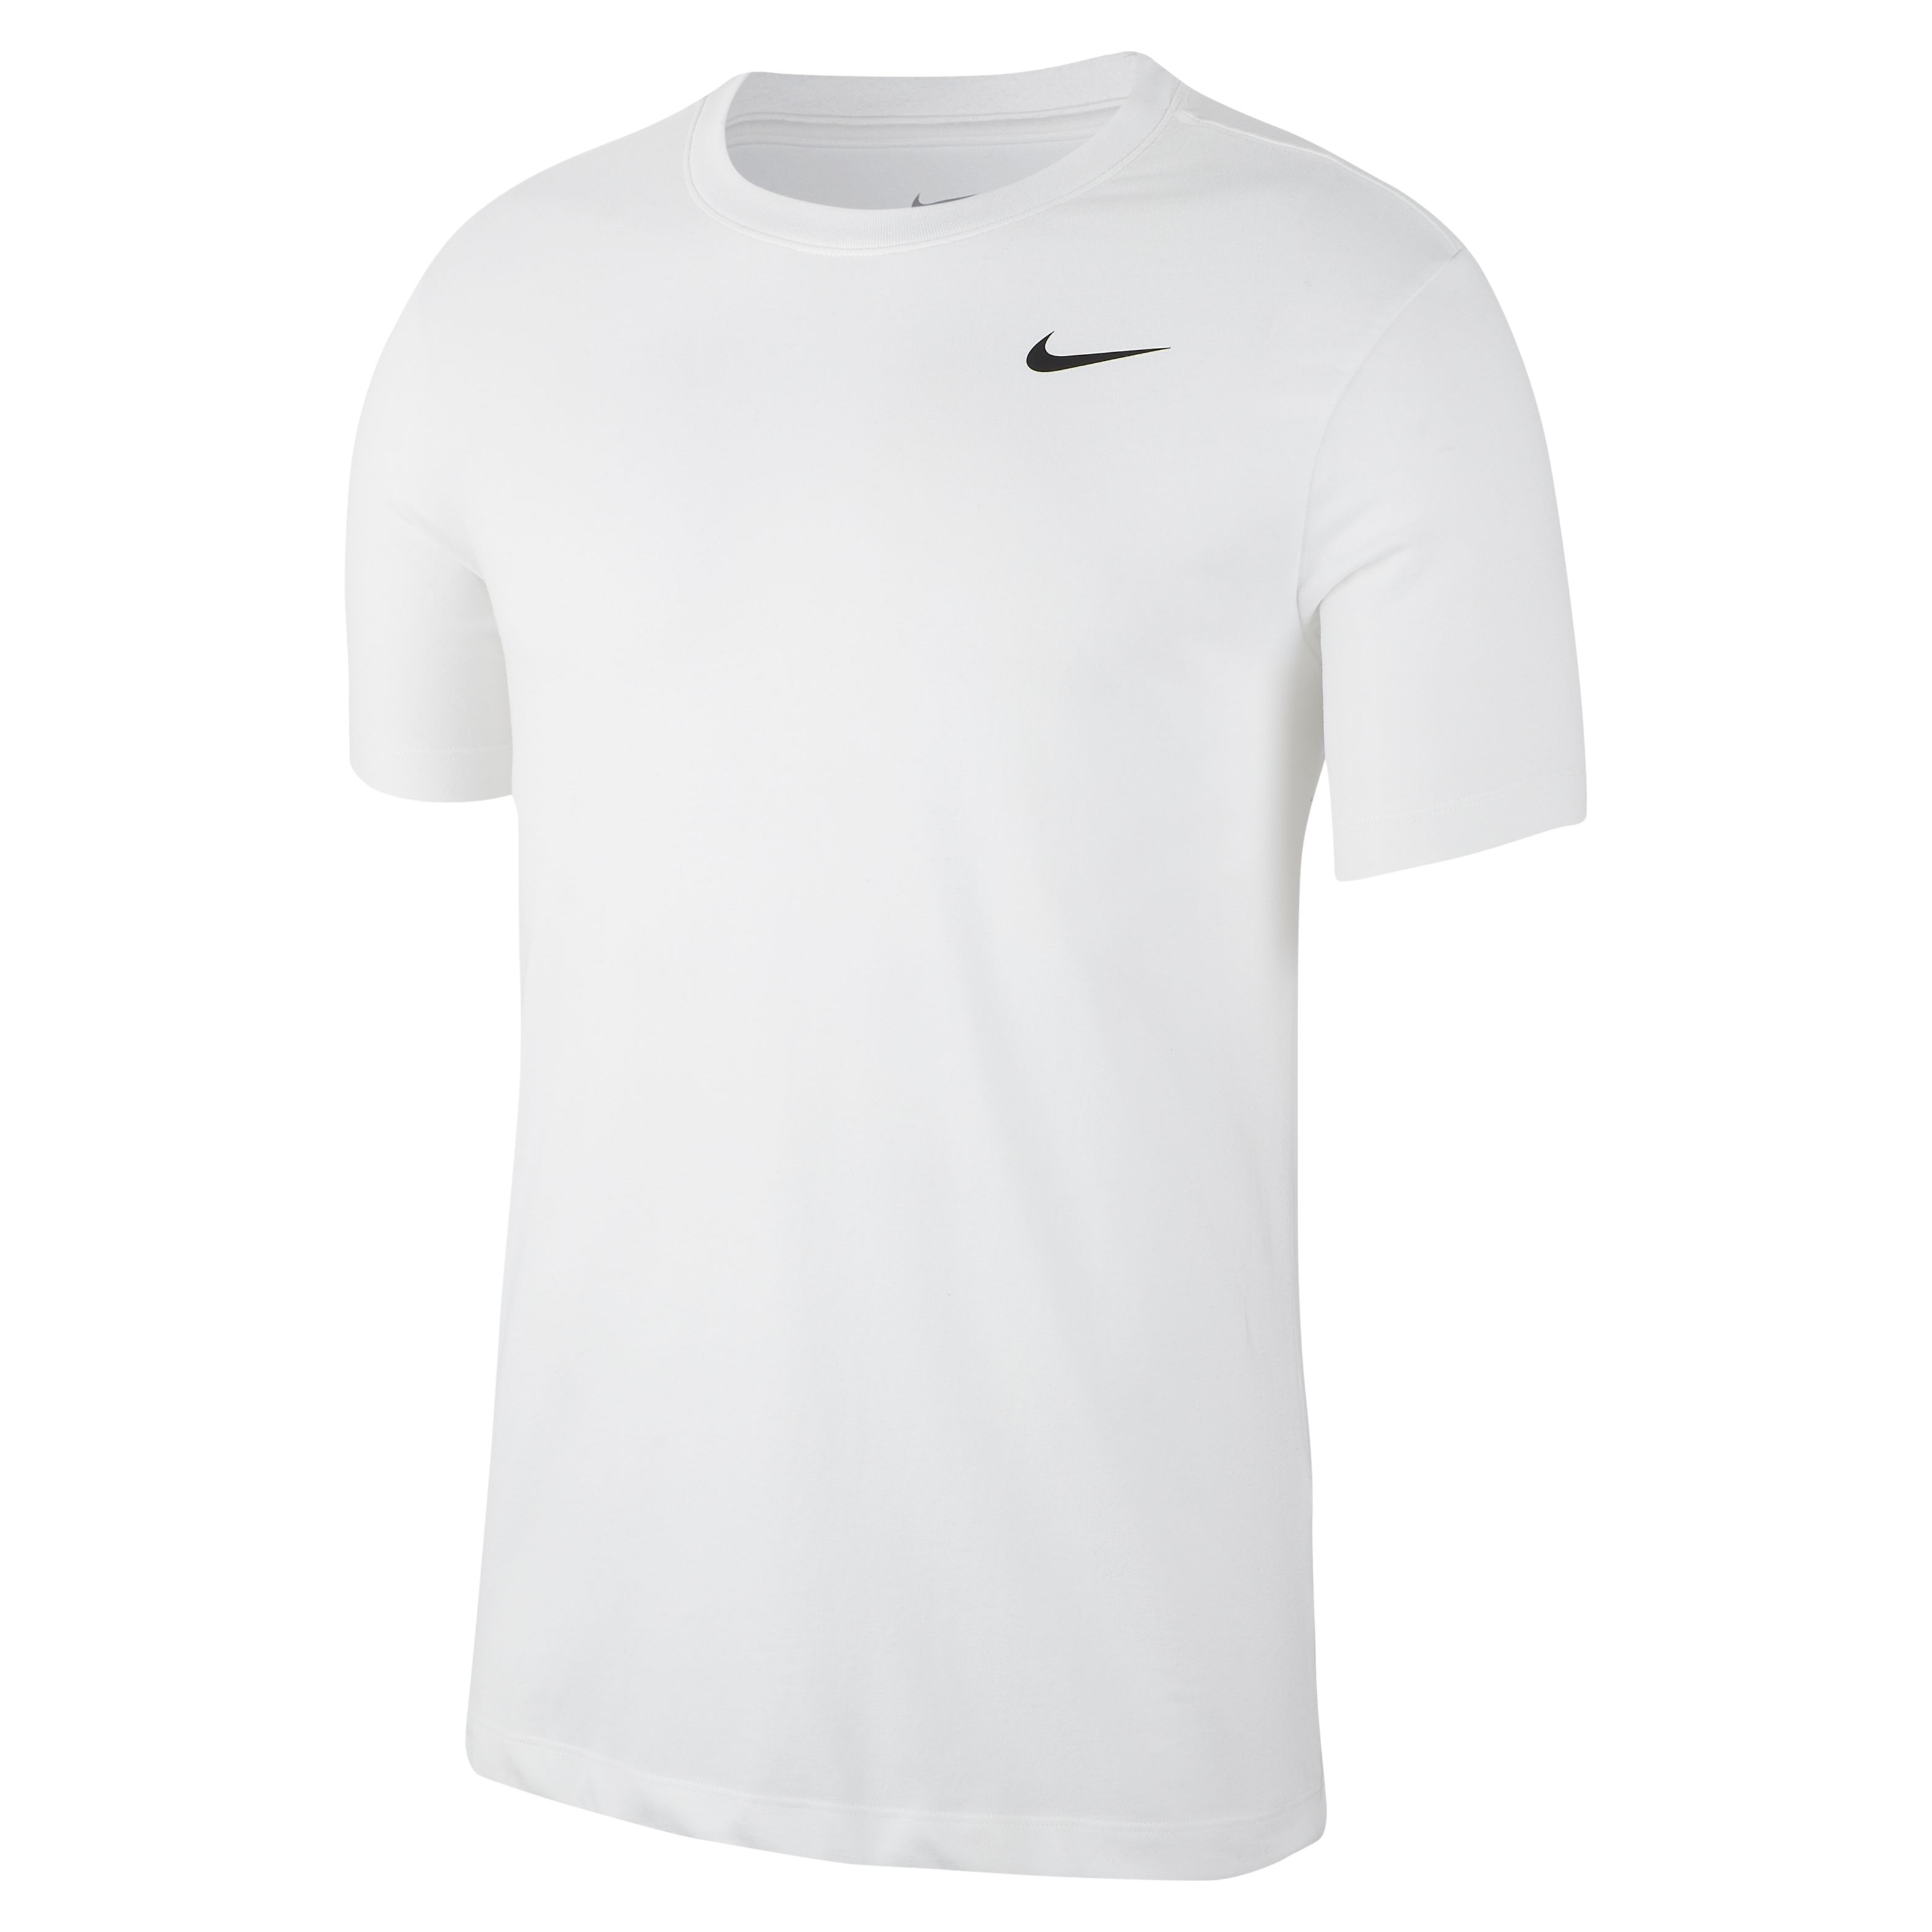 Nike Dry Tee Cotton Crew Solid 